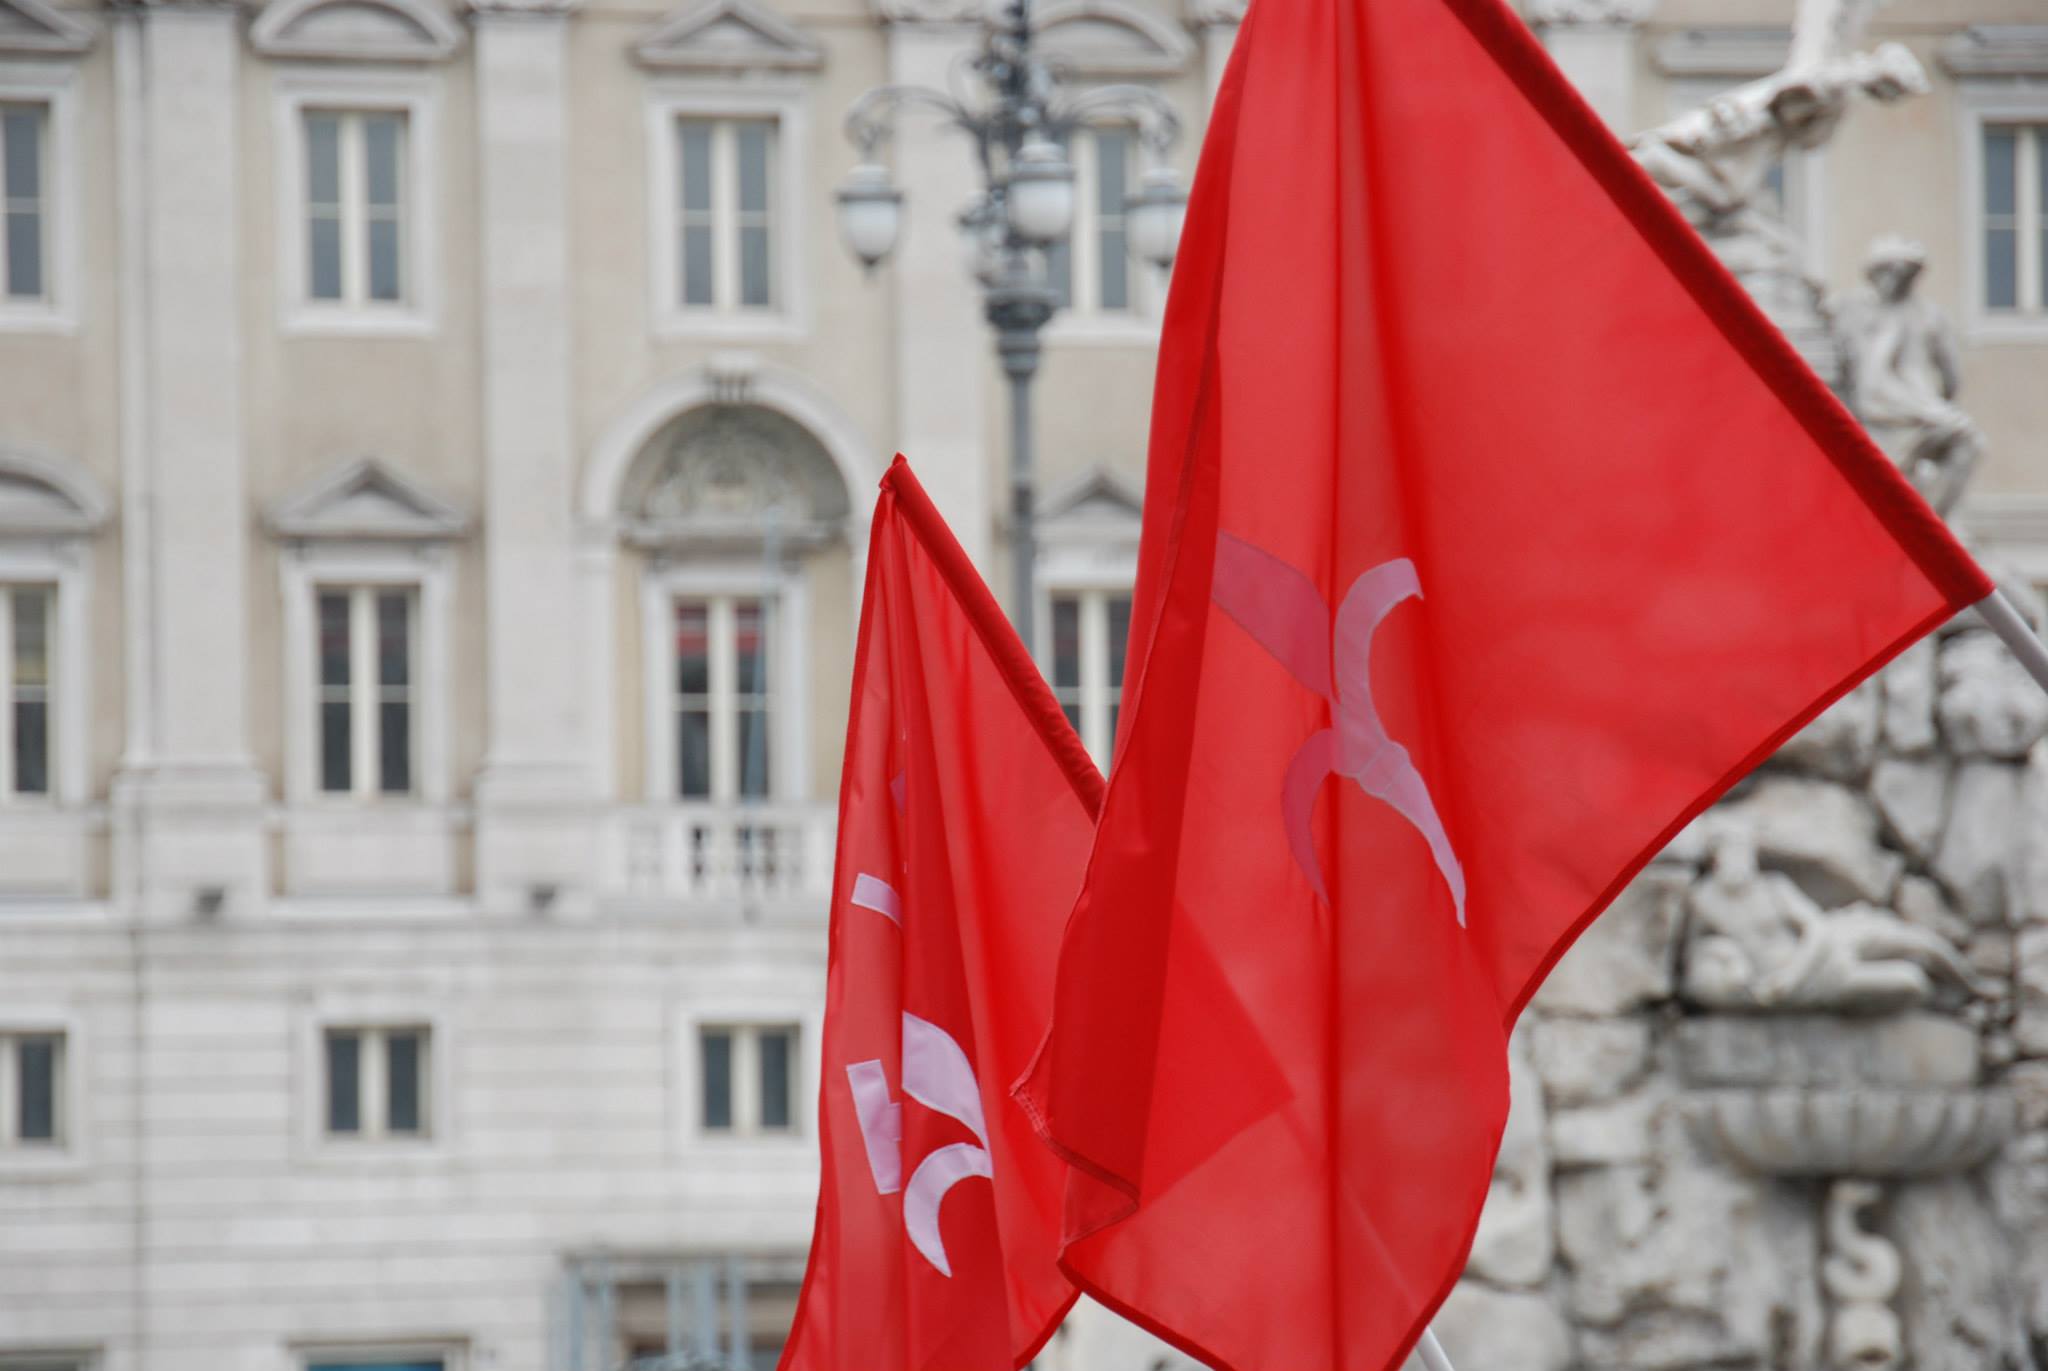 Trieste: a political judgment in spite of the law